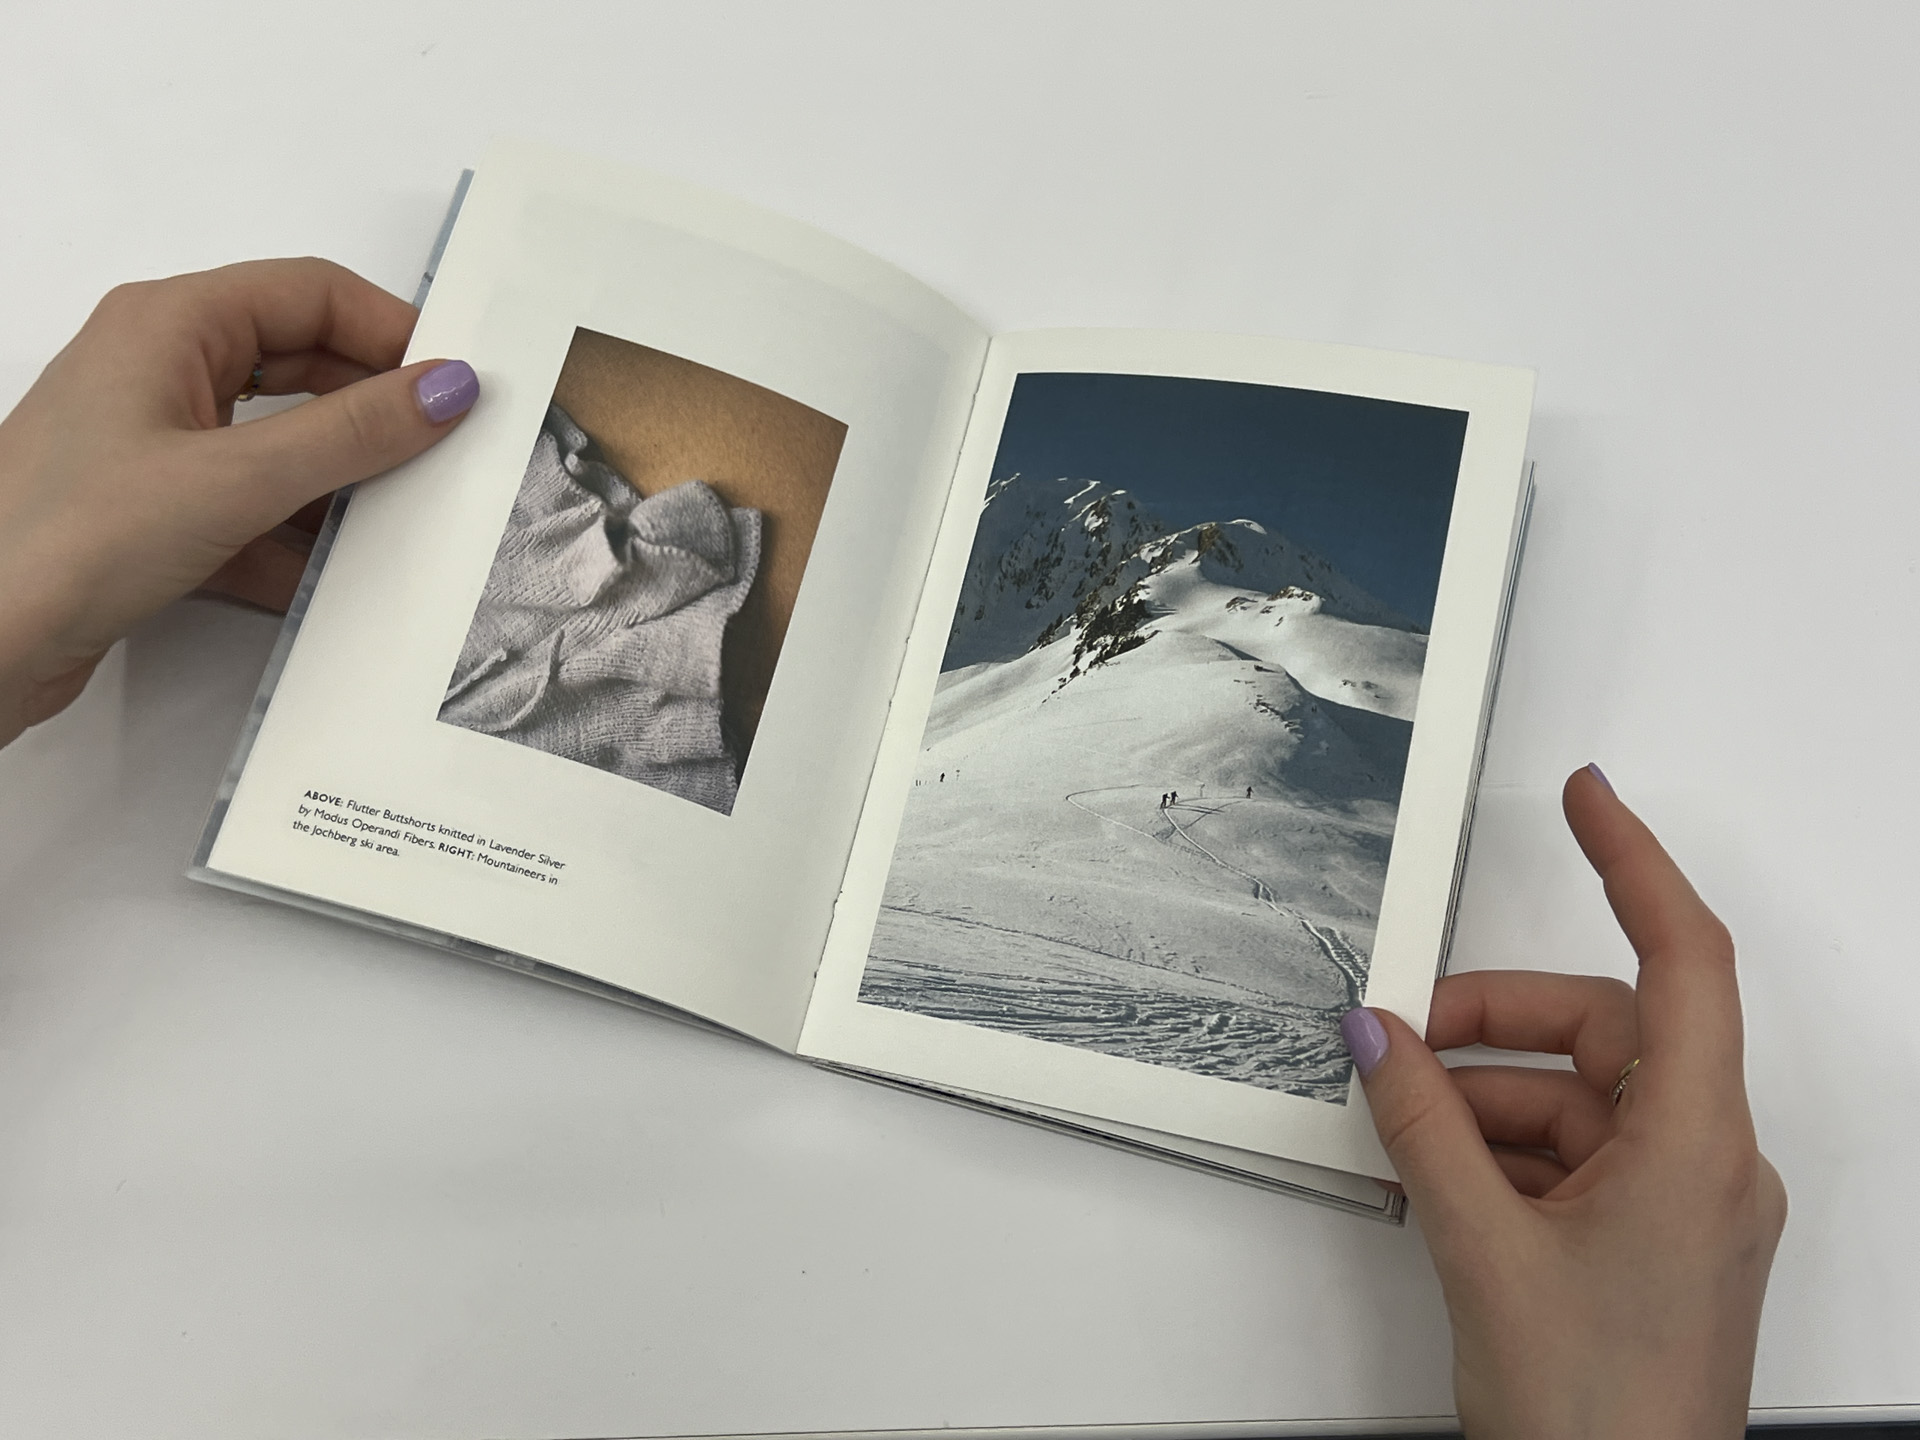 book opened to photos of knitted clothing vs mountain covered in snow